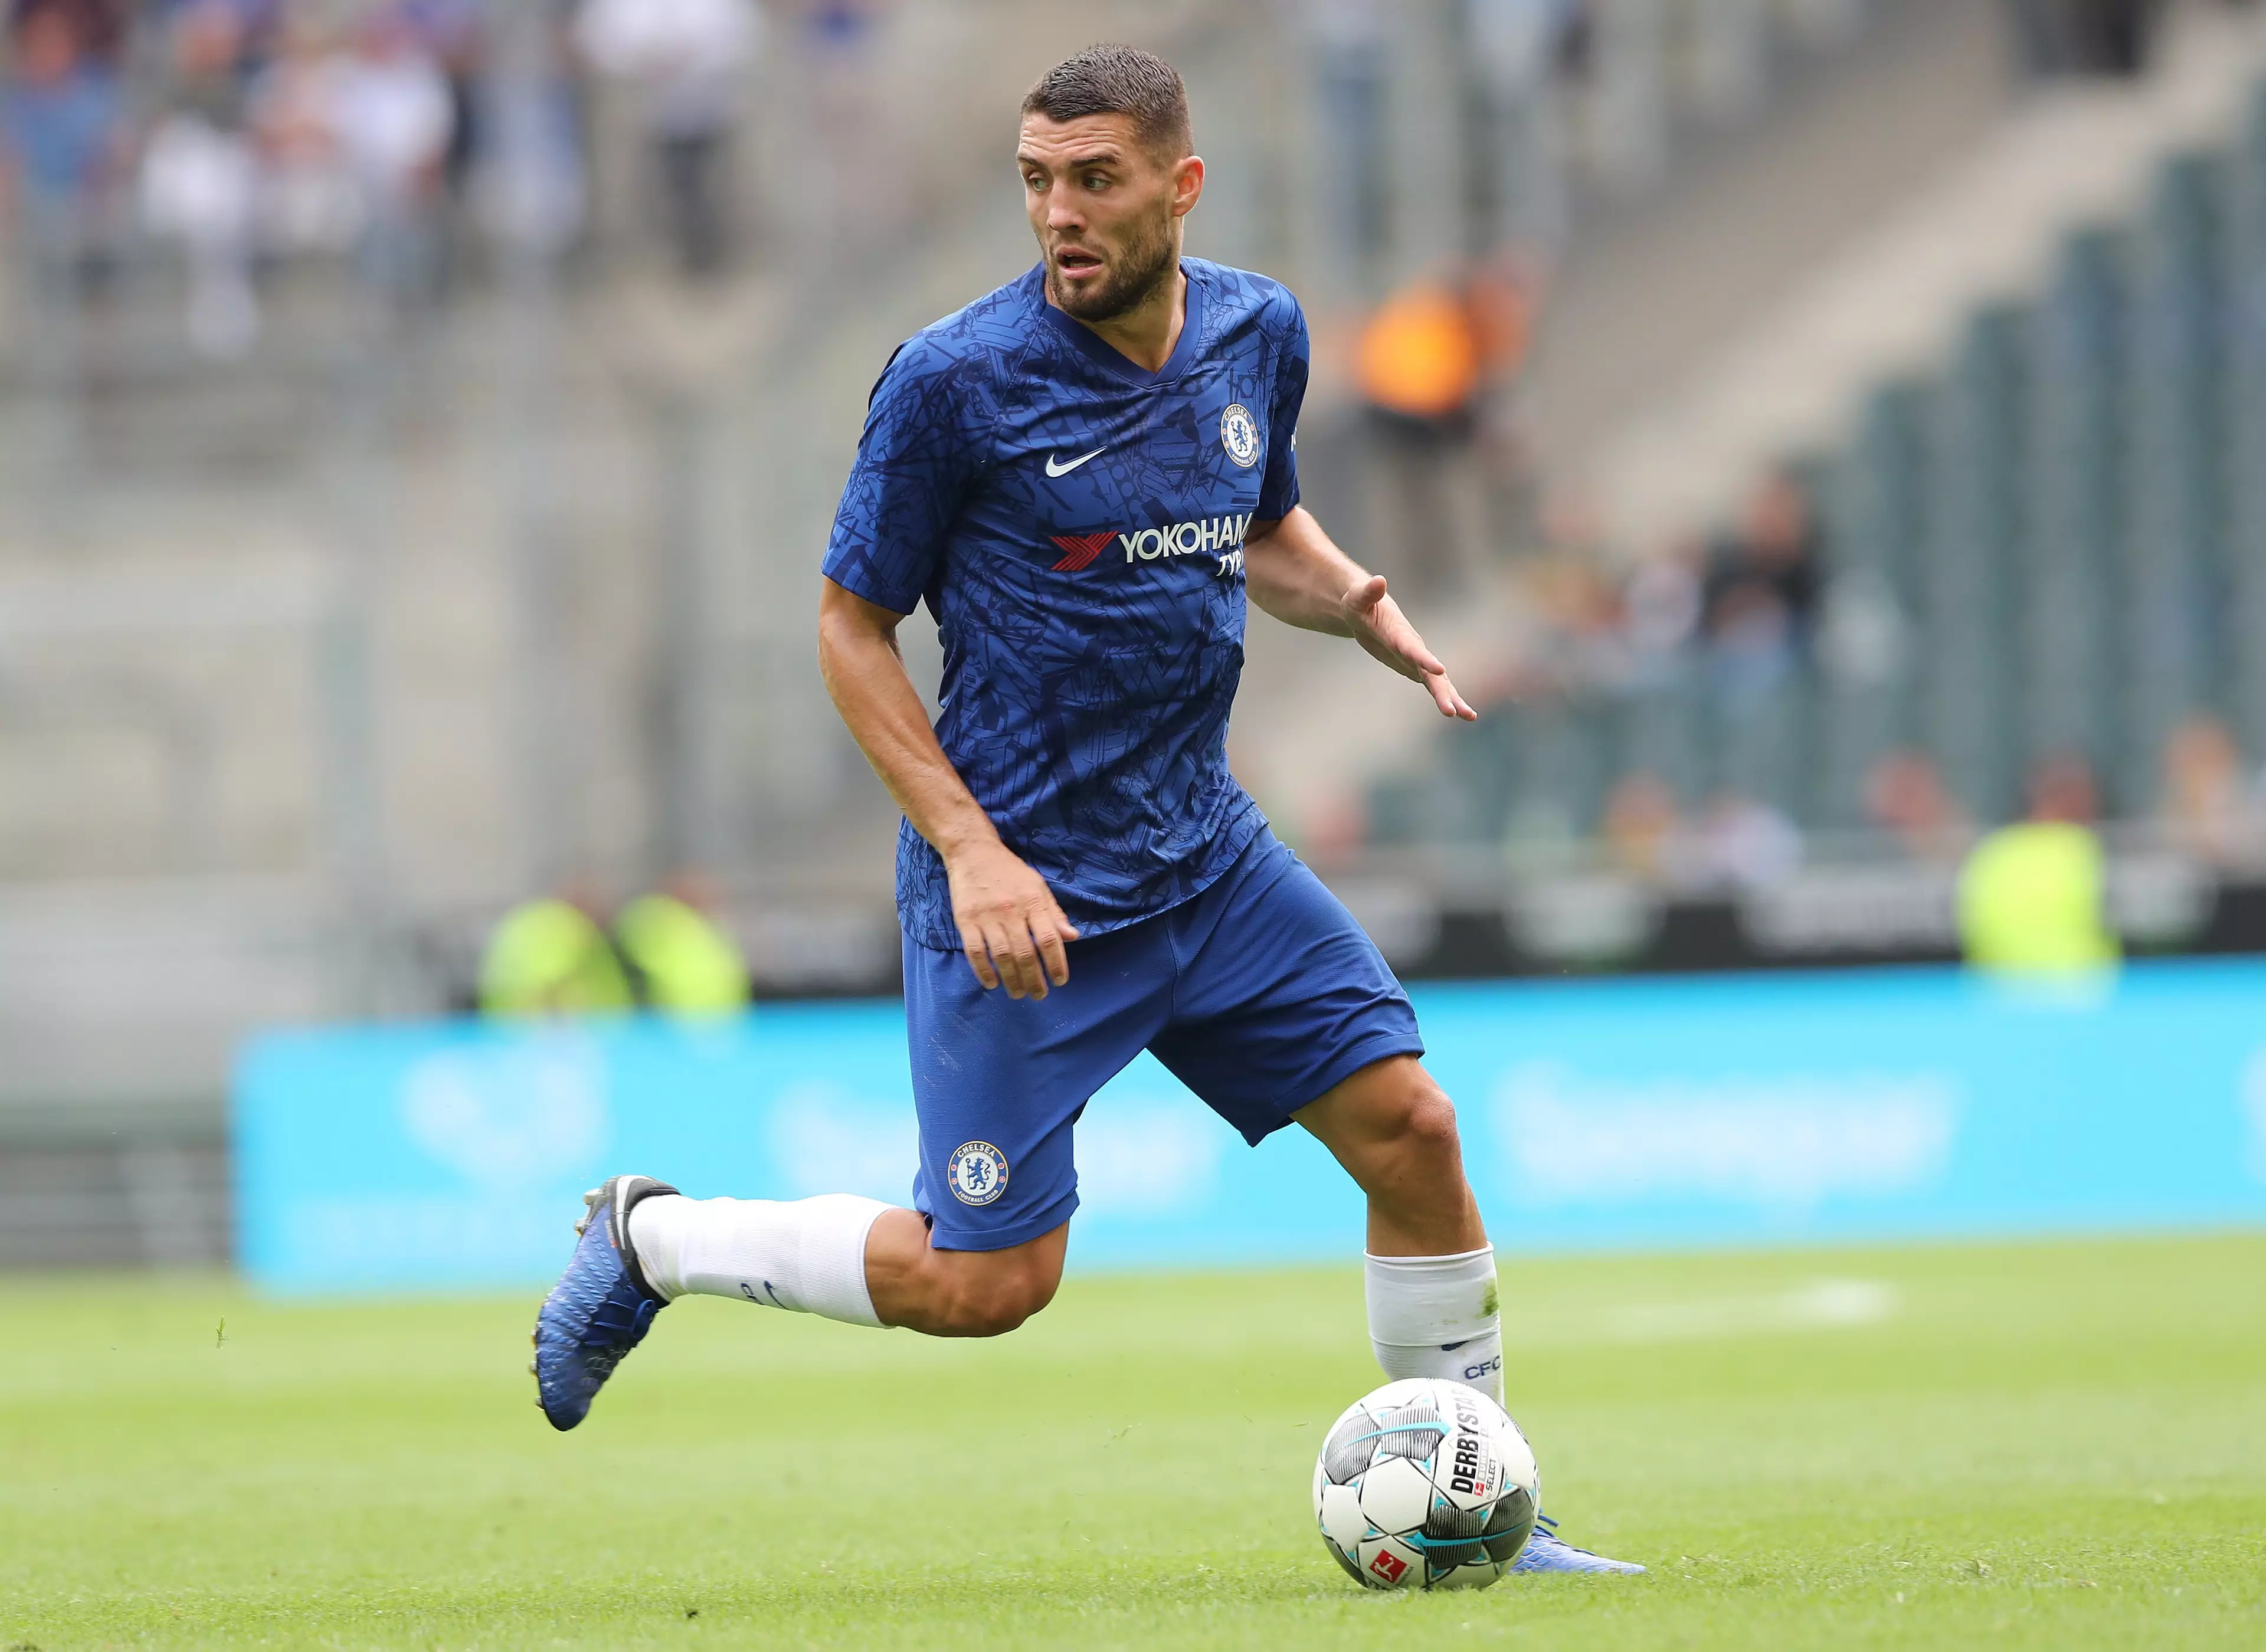 Chelsea made their deal to sign Mateo Kovacic from Real Madrid permanent